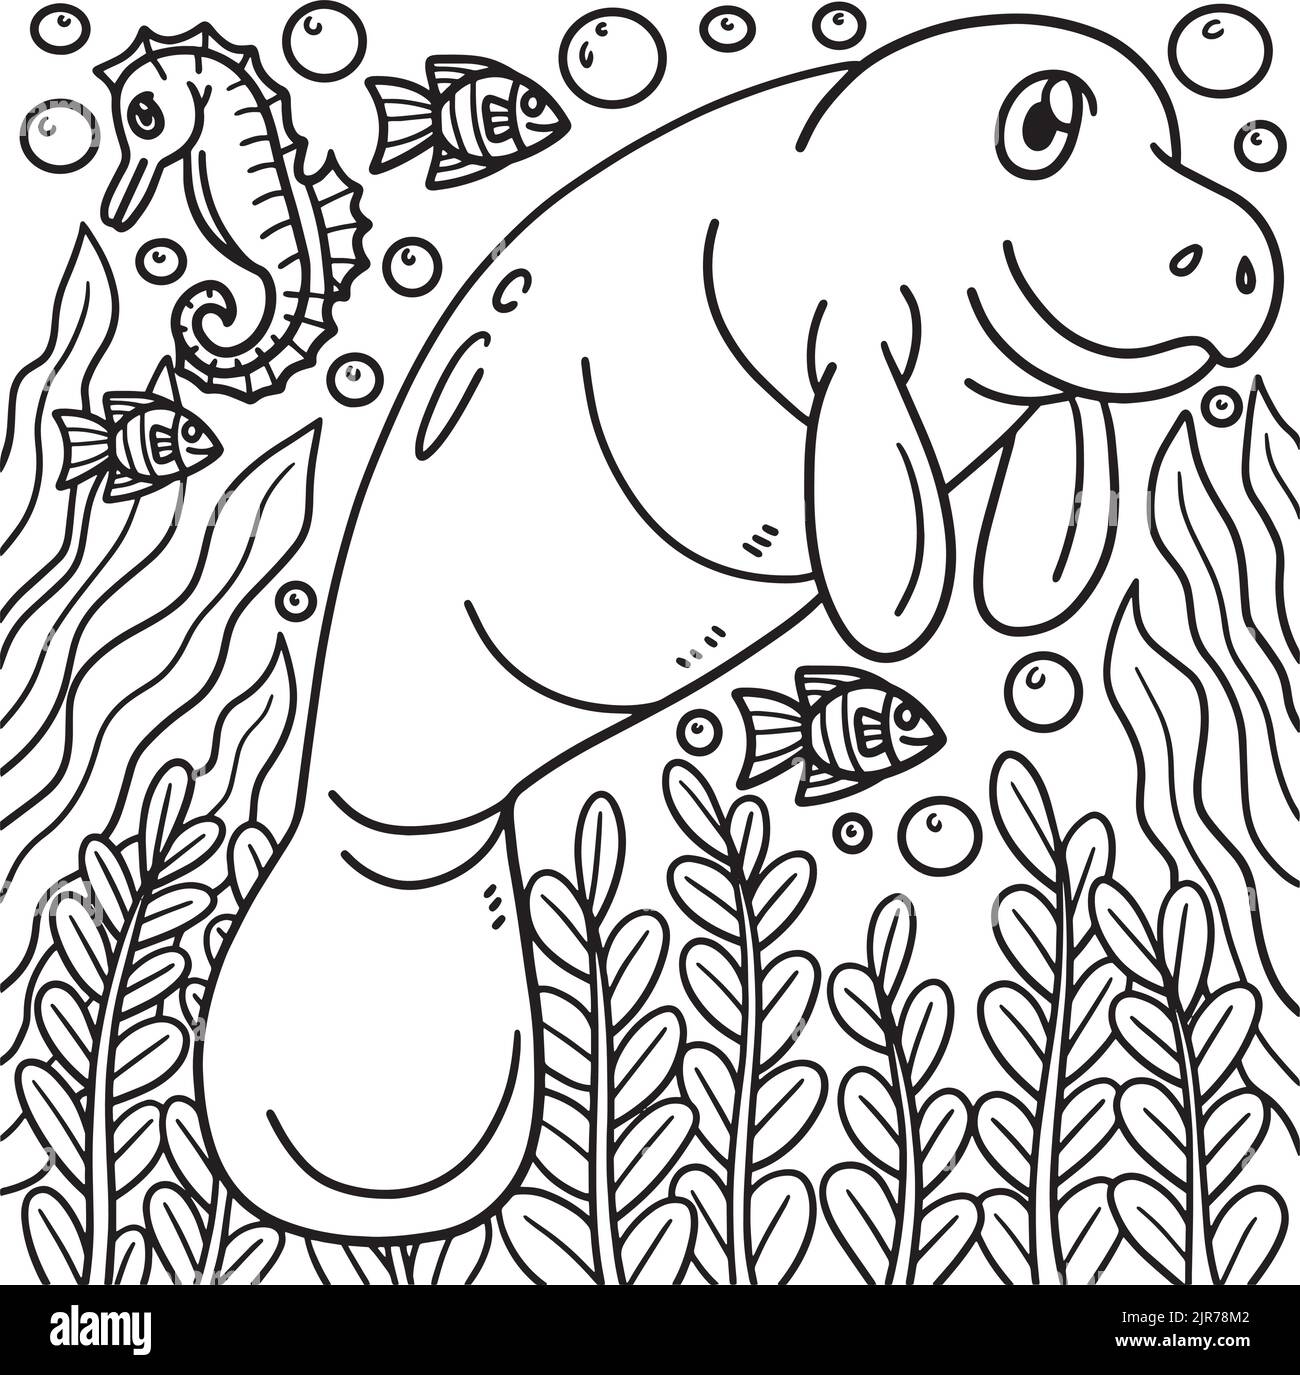 Manatee Coloring Page for Kids Stock Vector